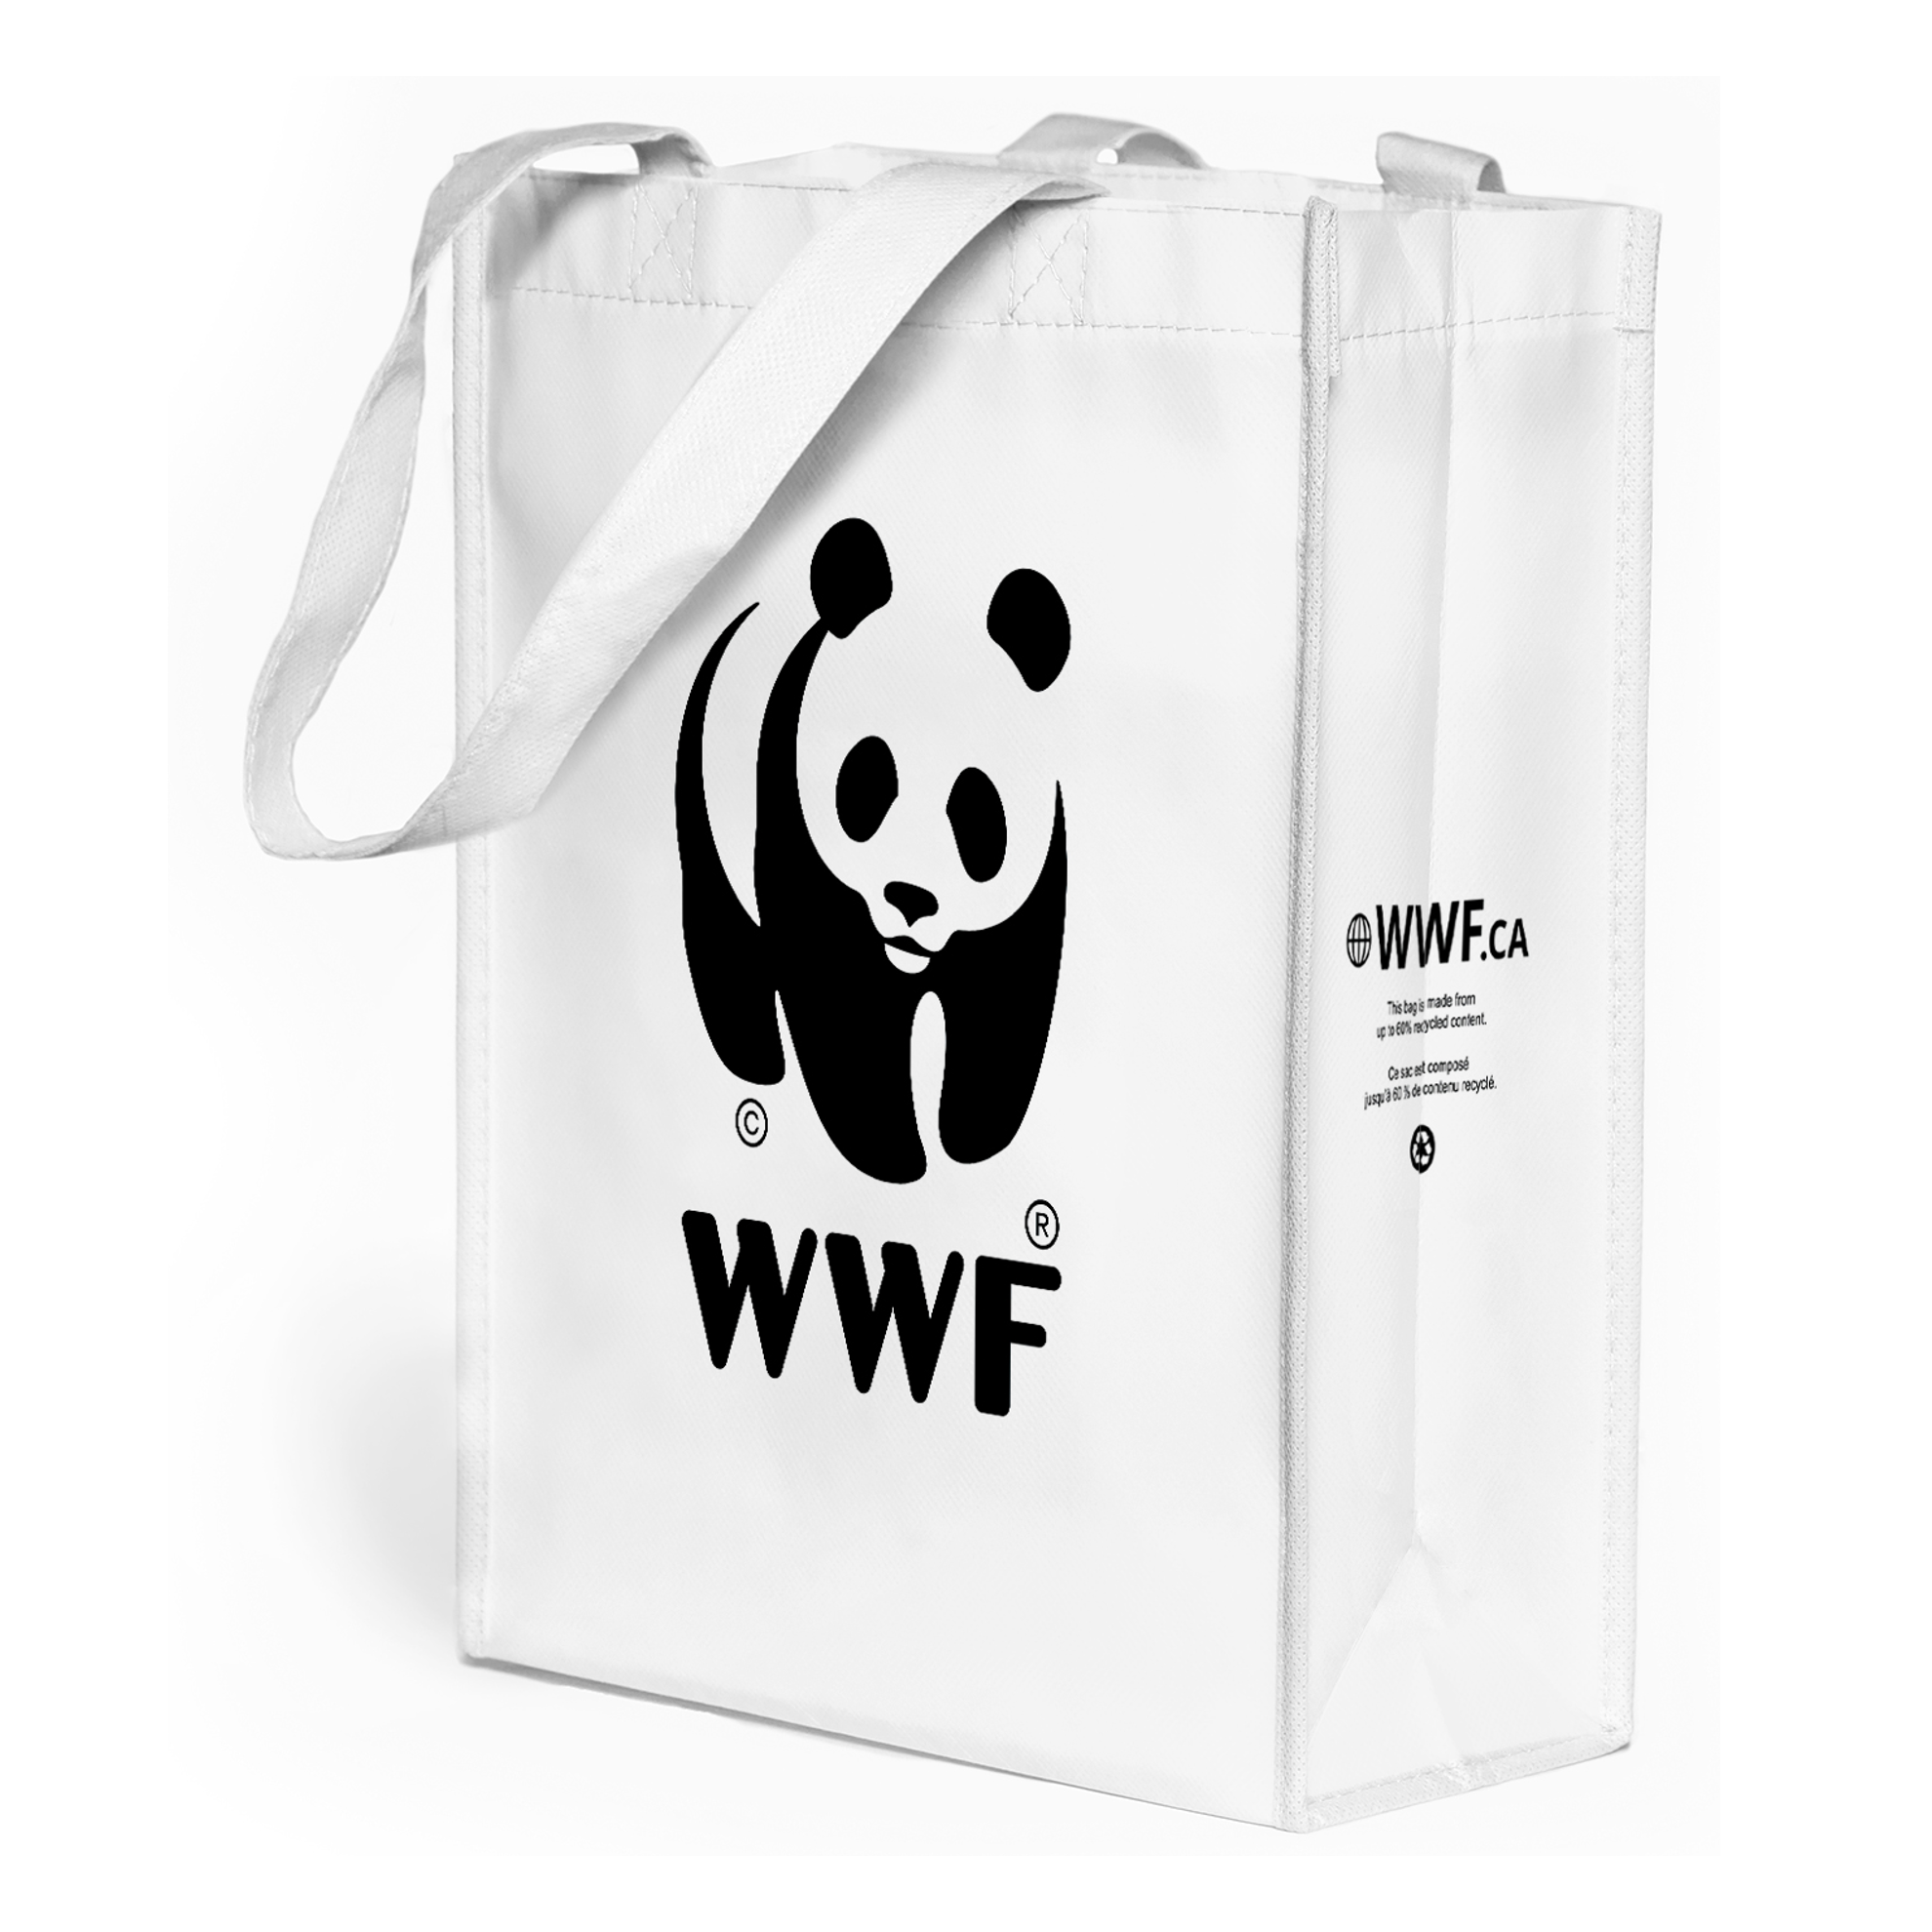 A picture of the white reusable tote bag with WWF logo